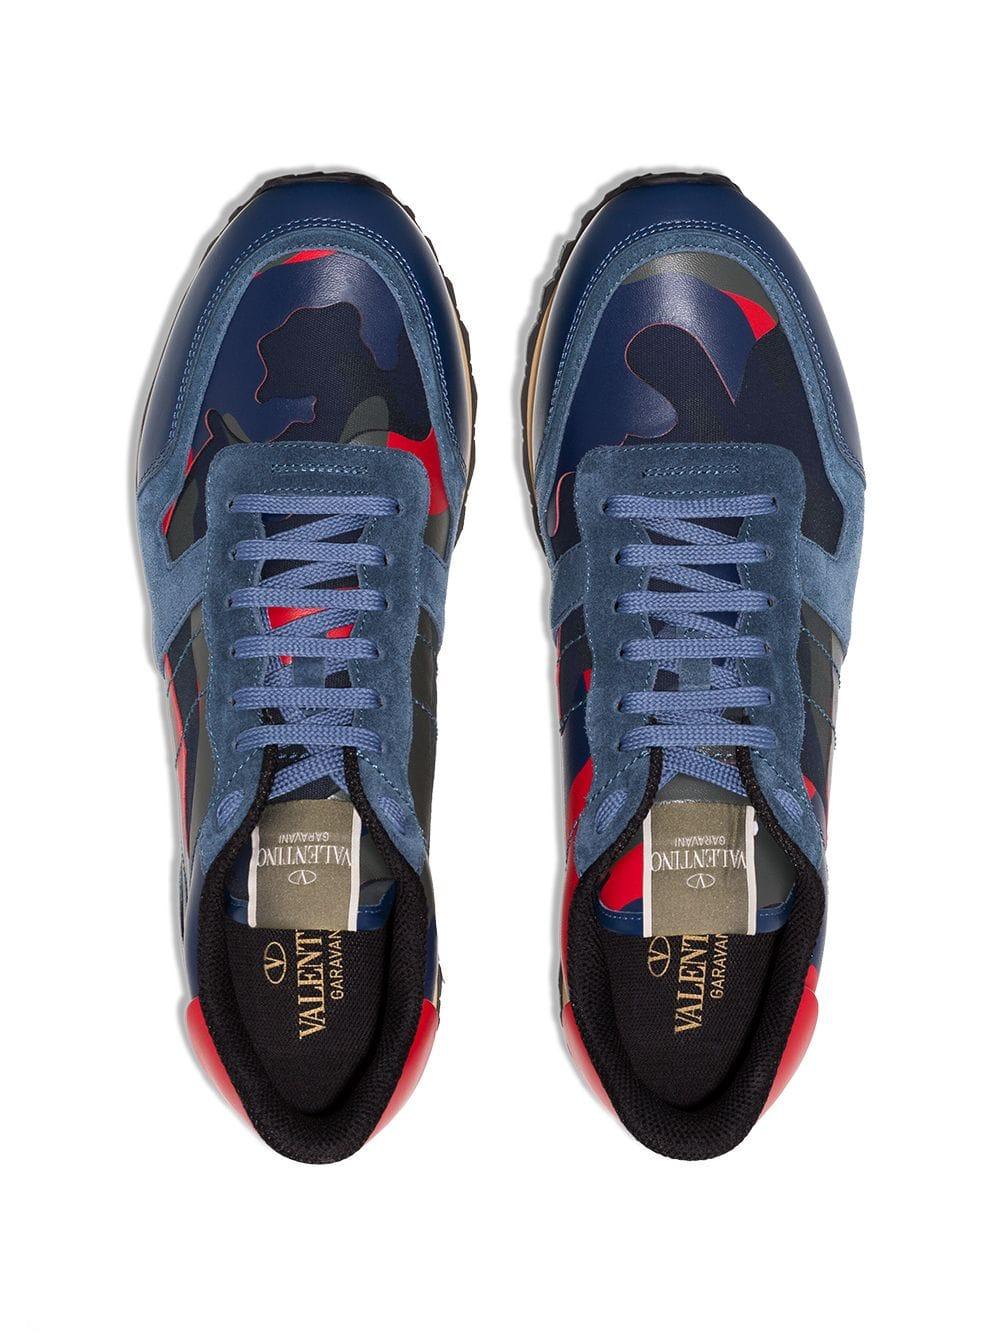 Valentino Rock Runner Camouflage Suede & Leather Sneaker in Navy/Red (Blue) - Lyst